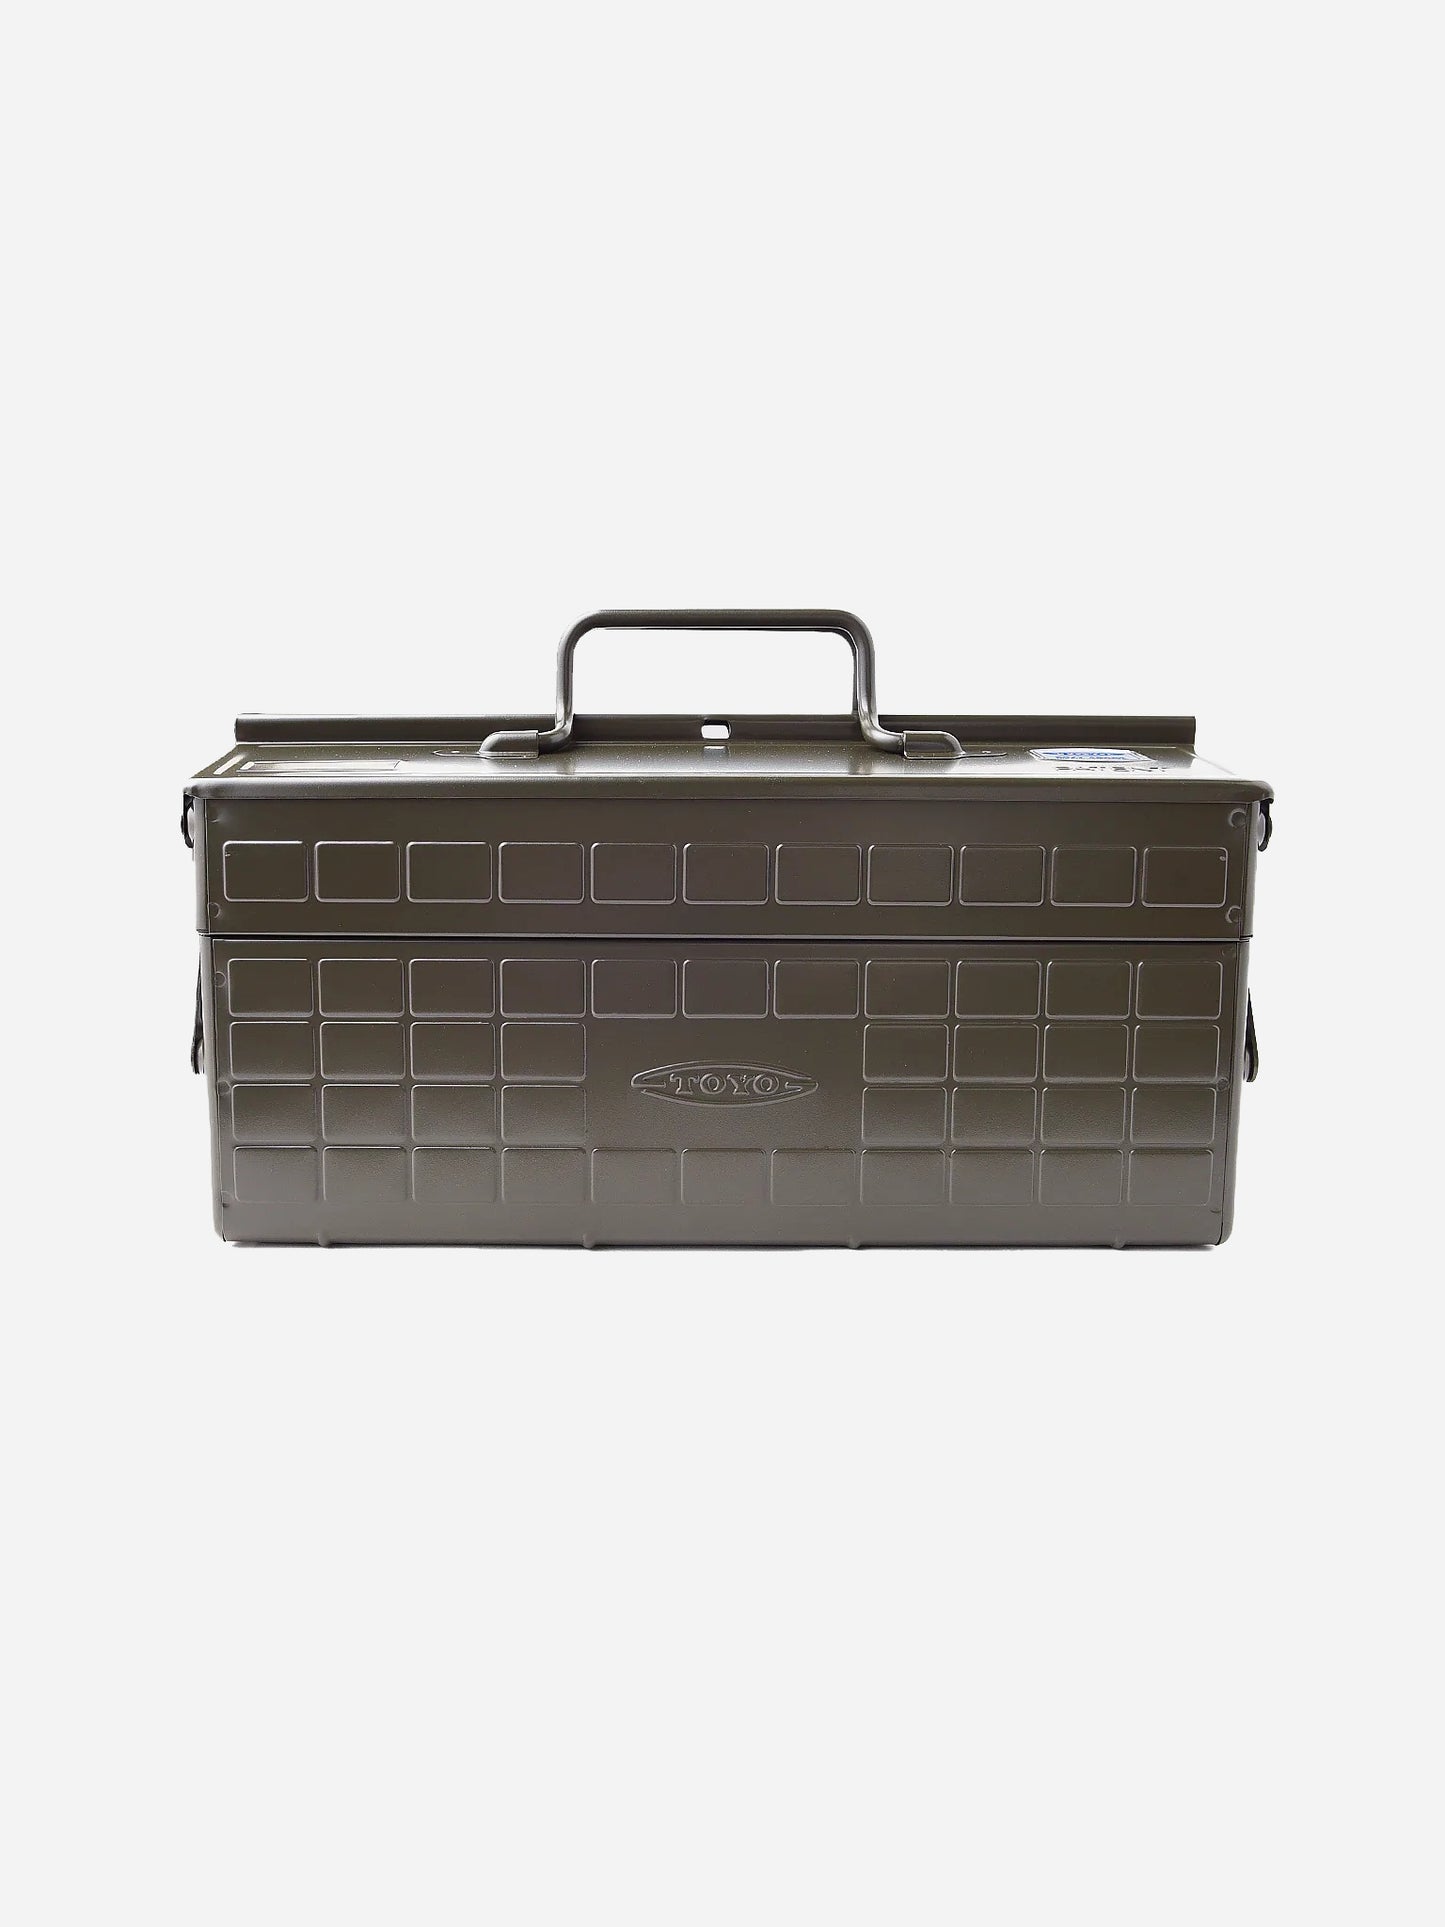 Toyo ST-350 Cantilever Lid Steel Toolbox